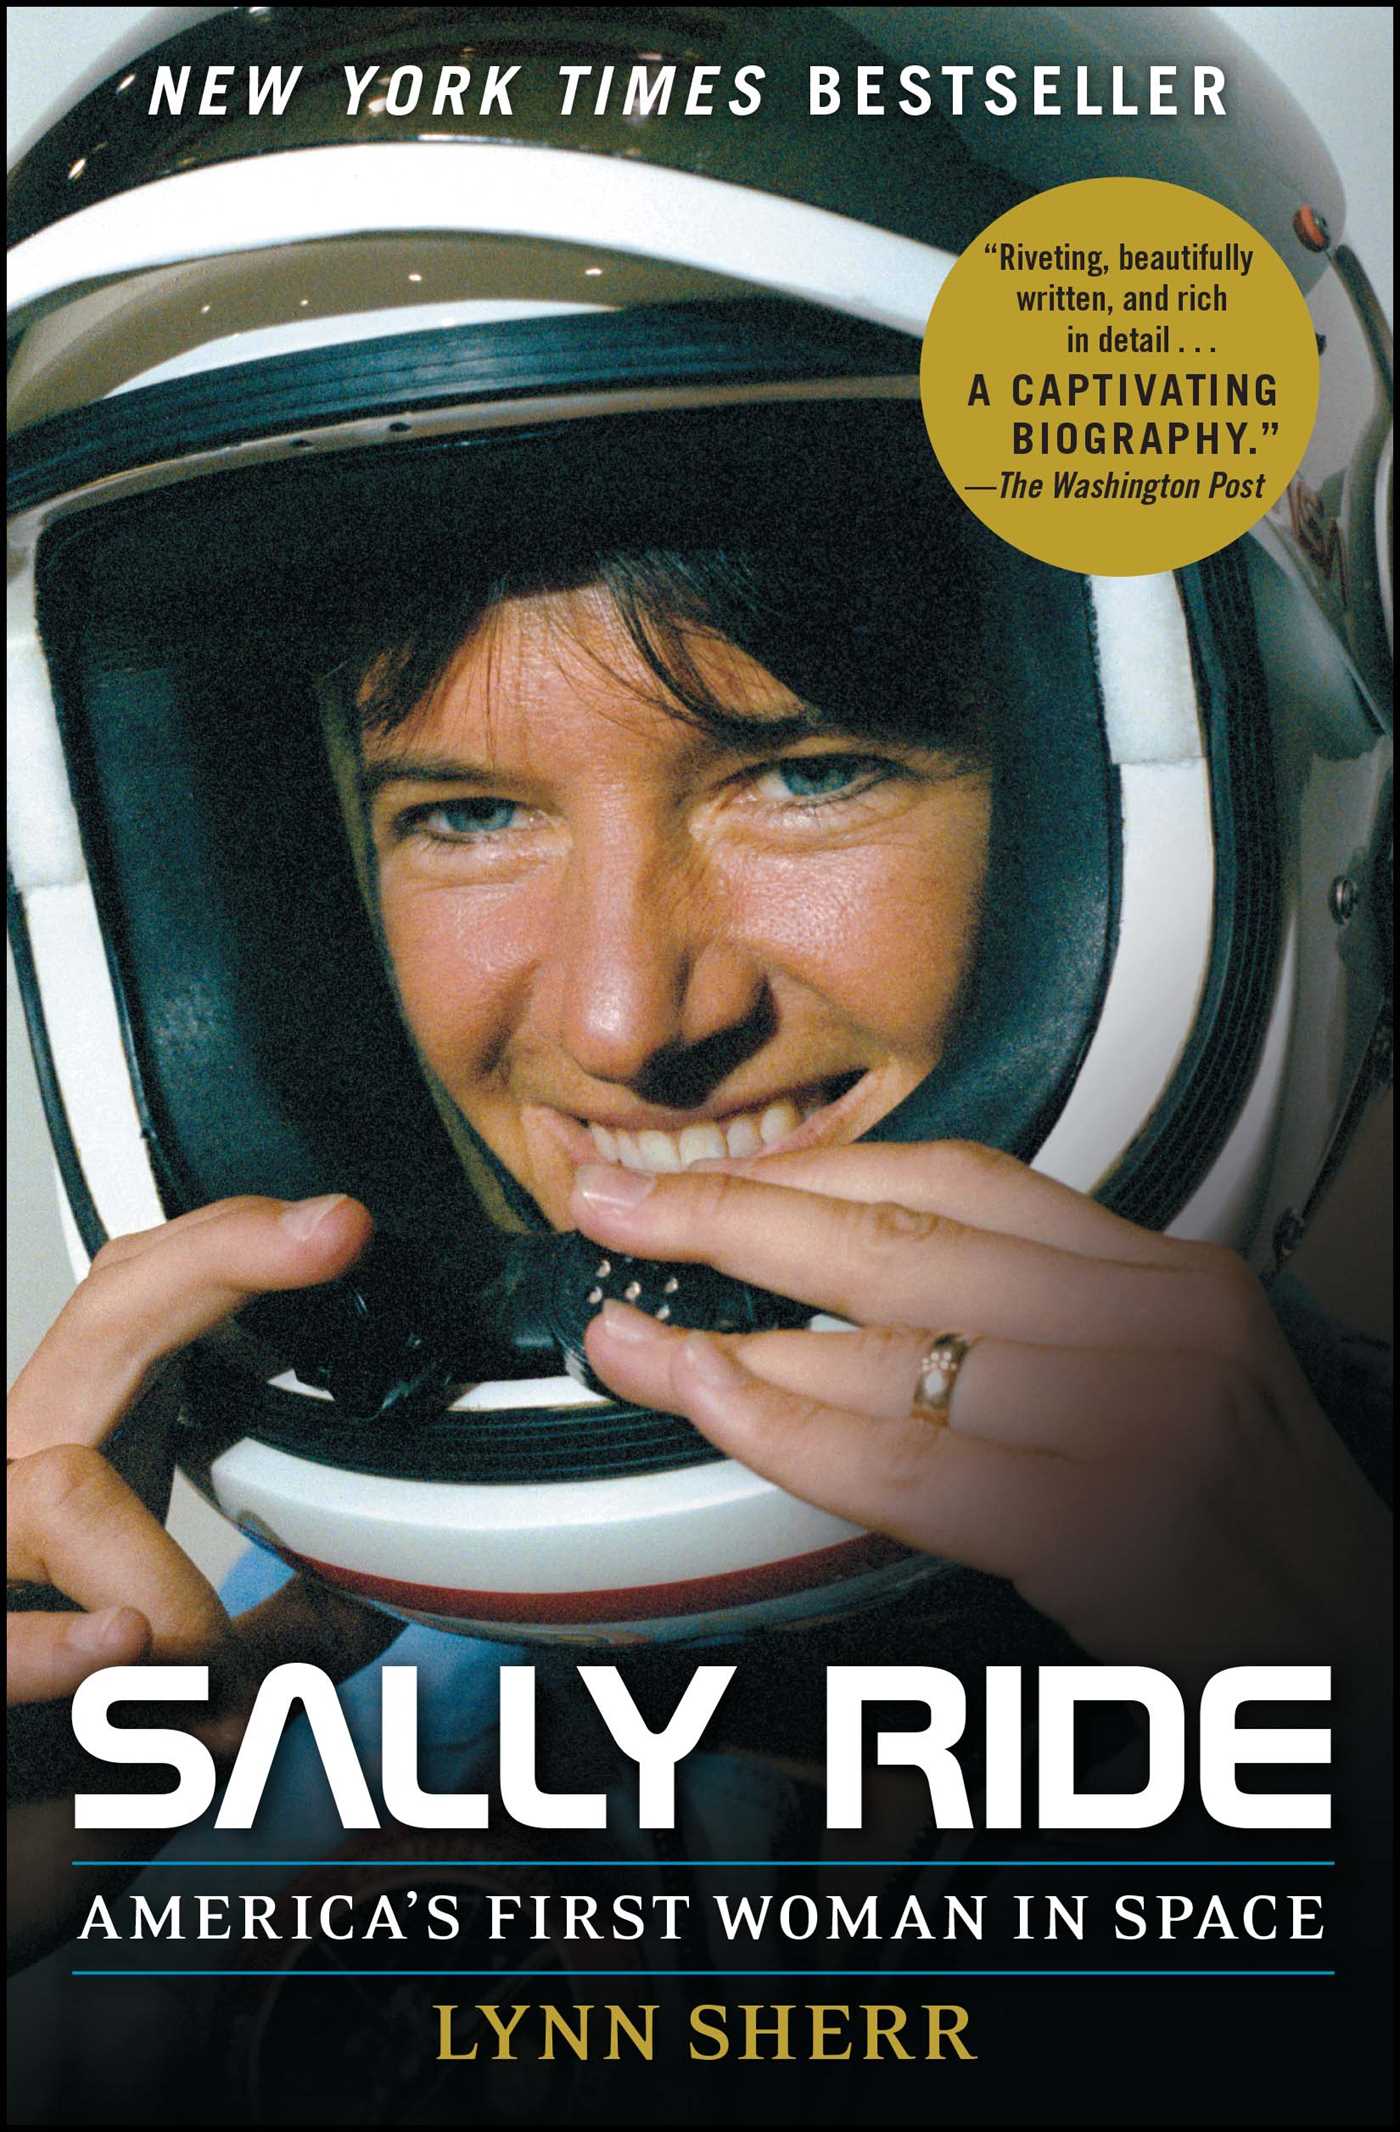 Image for "Sally Ride"